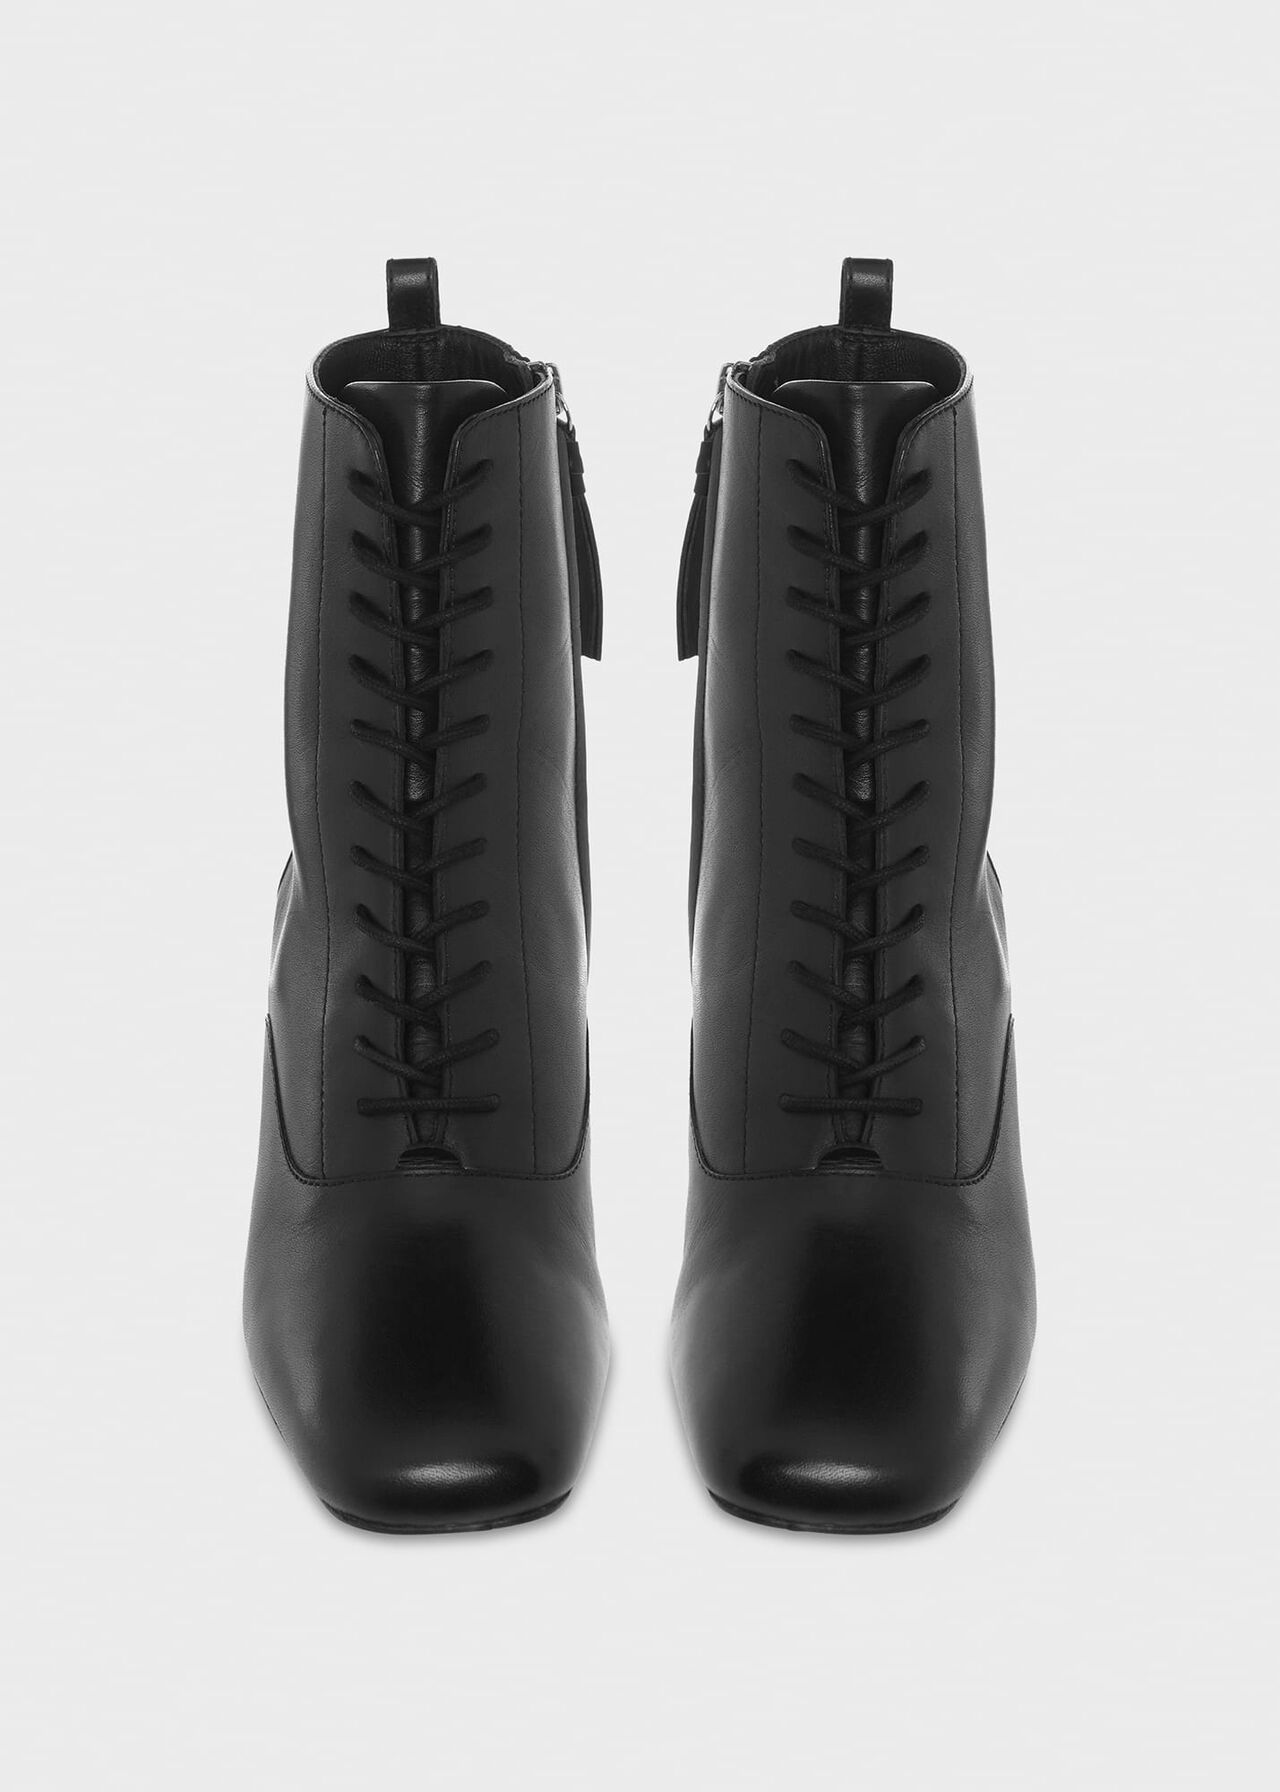 Issy Lace Up Boot, Black, hi-res